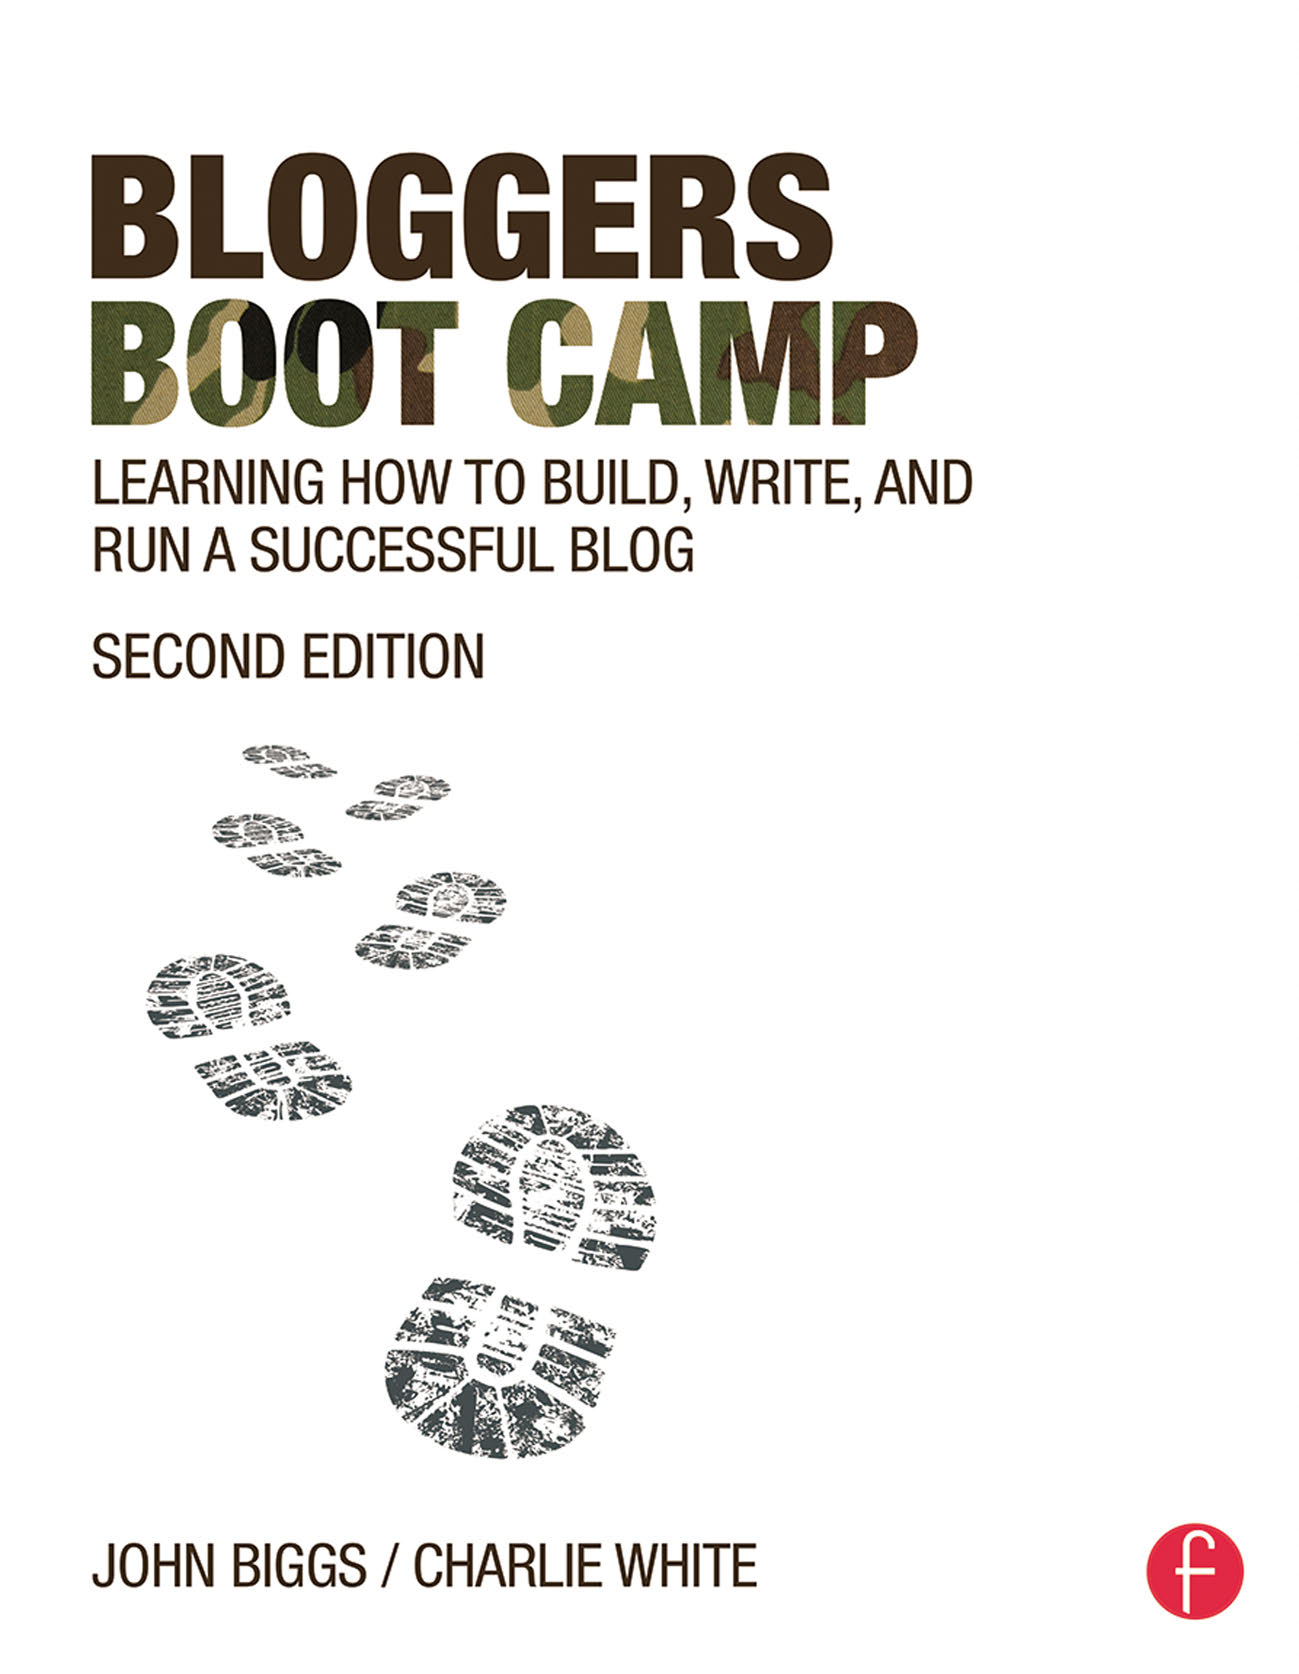 Bloggers Boot Camp: Learning How to Build, Write, and Run a Successful Blog, 2nd Edition